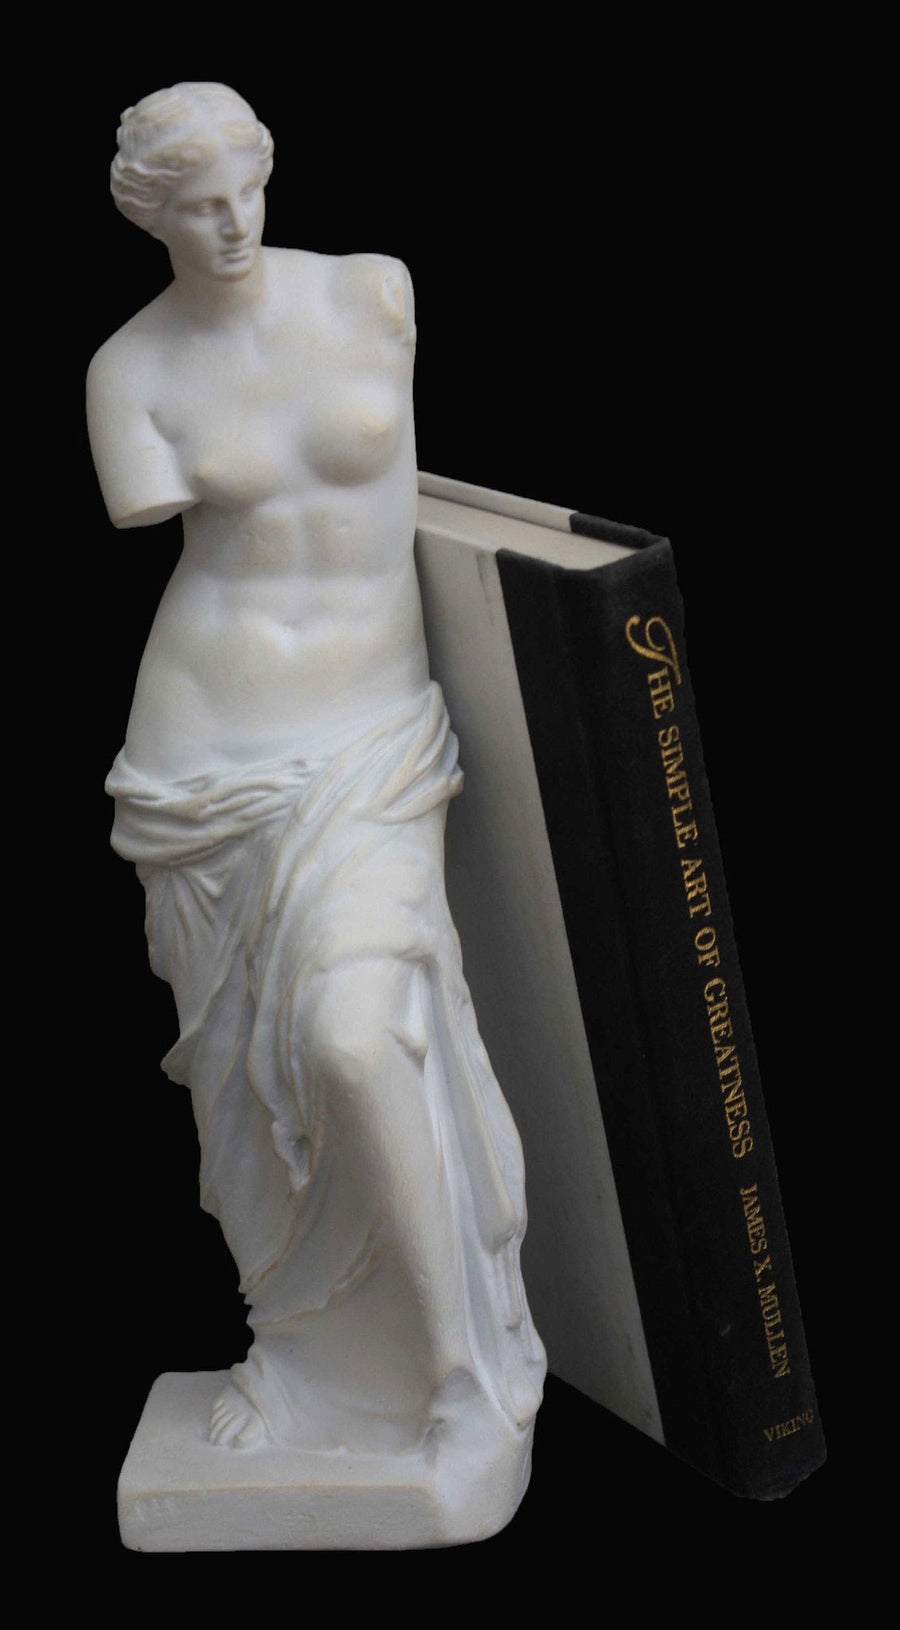 photo with black background of plaster cast sculpture of standing figure of Venus partially nude with a black and white book leaning against it